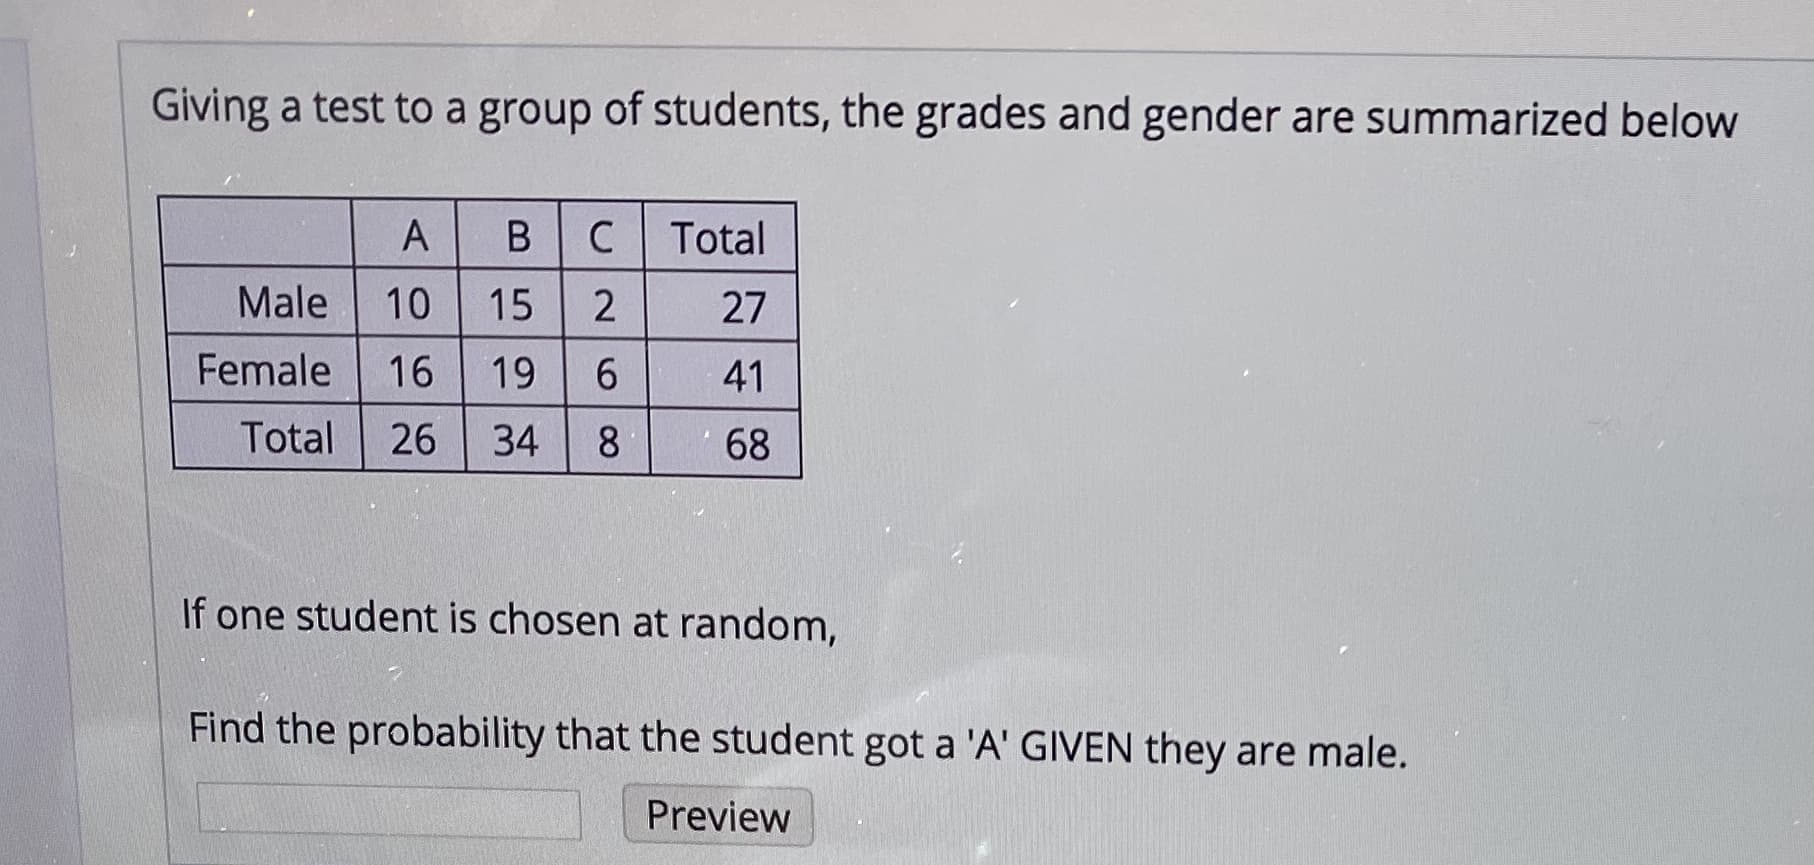 Giving a test to a group of students, the grades and gender are summarized below
Total
Male
10
15
27
Female
16
19
41
Total
26
34
68
If one student is chosen at random,
Find the probability that the student got a 'A' GIVEN they are male.
Preview
